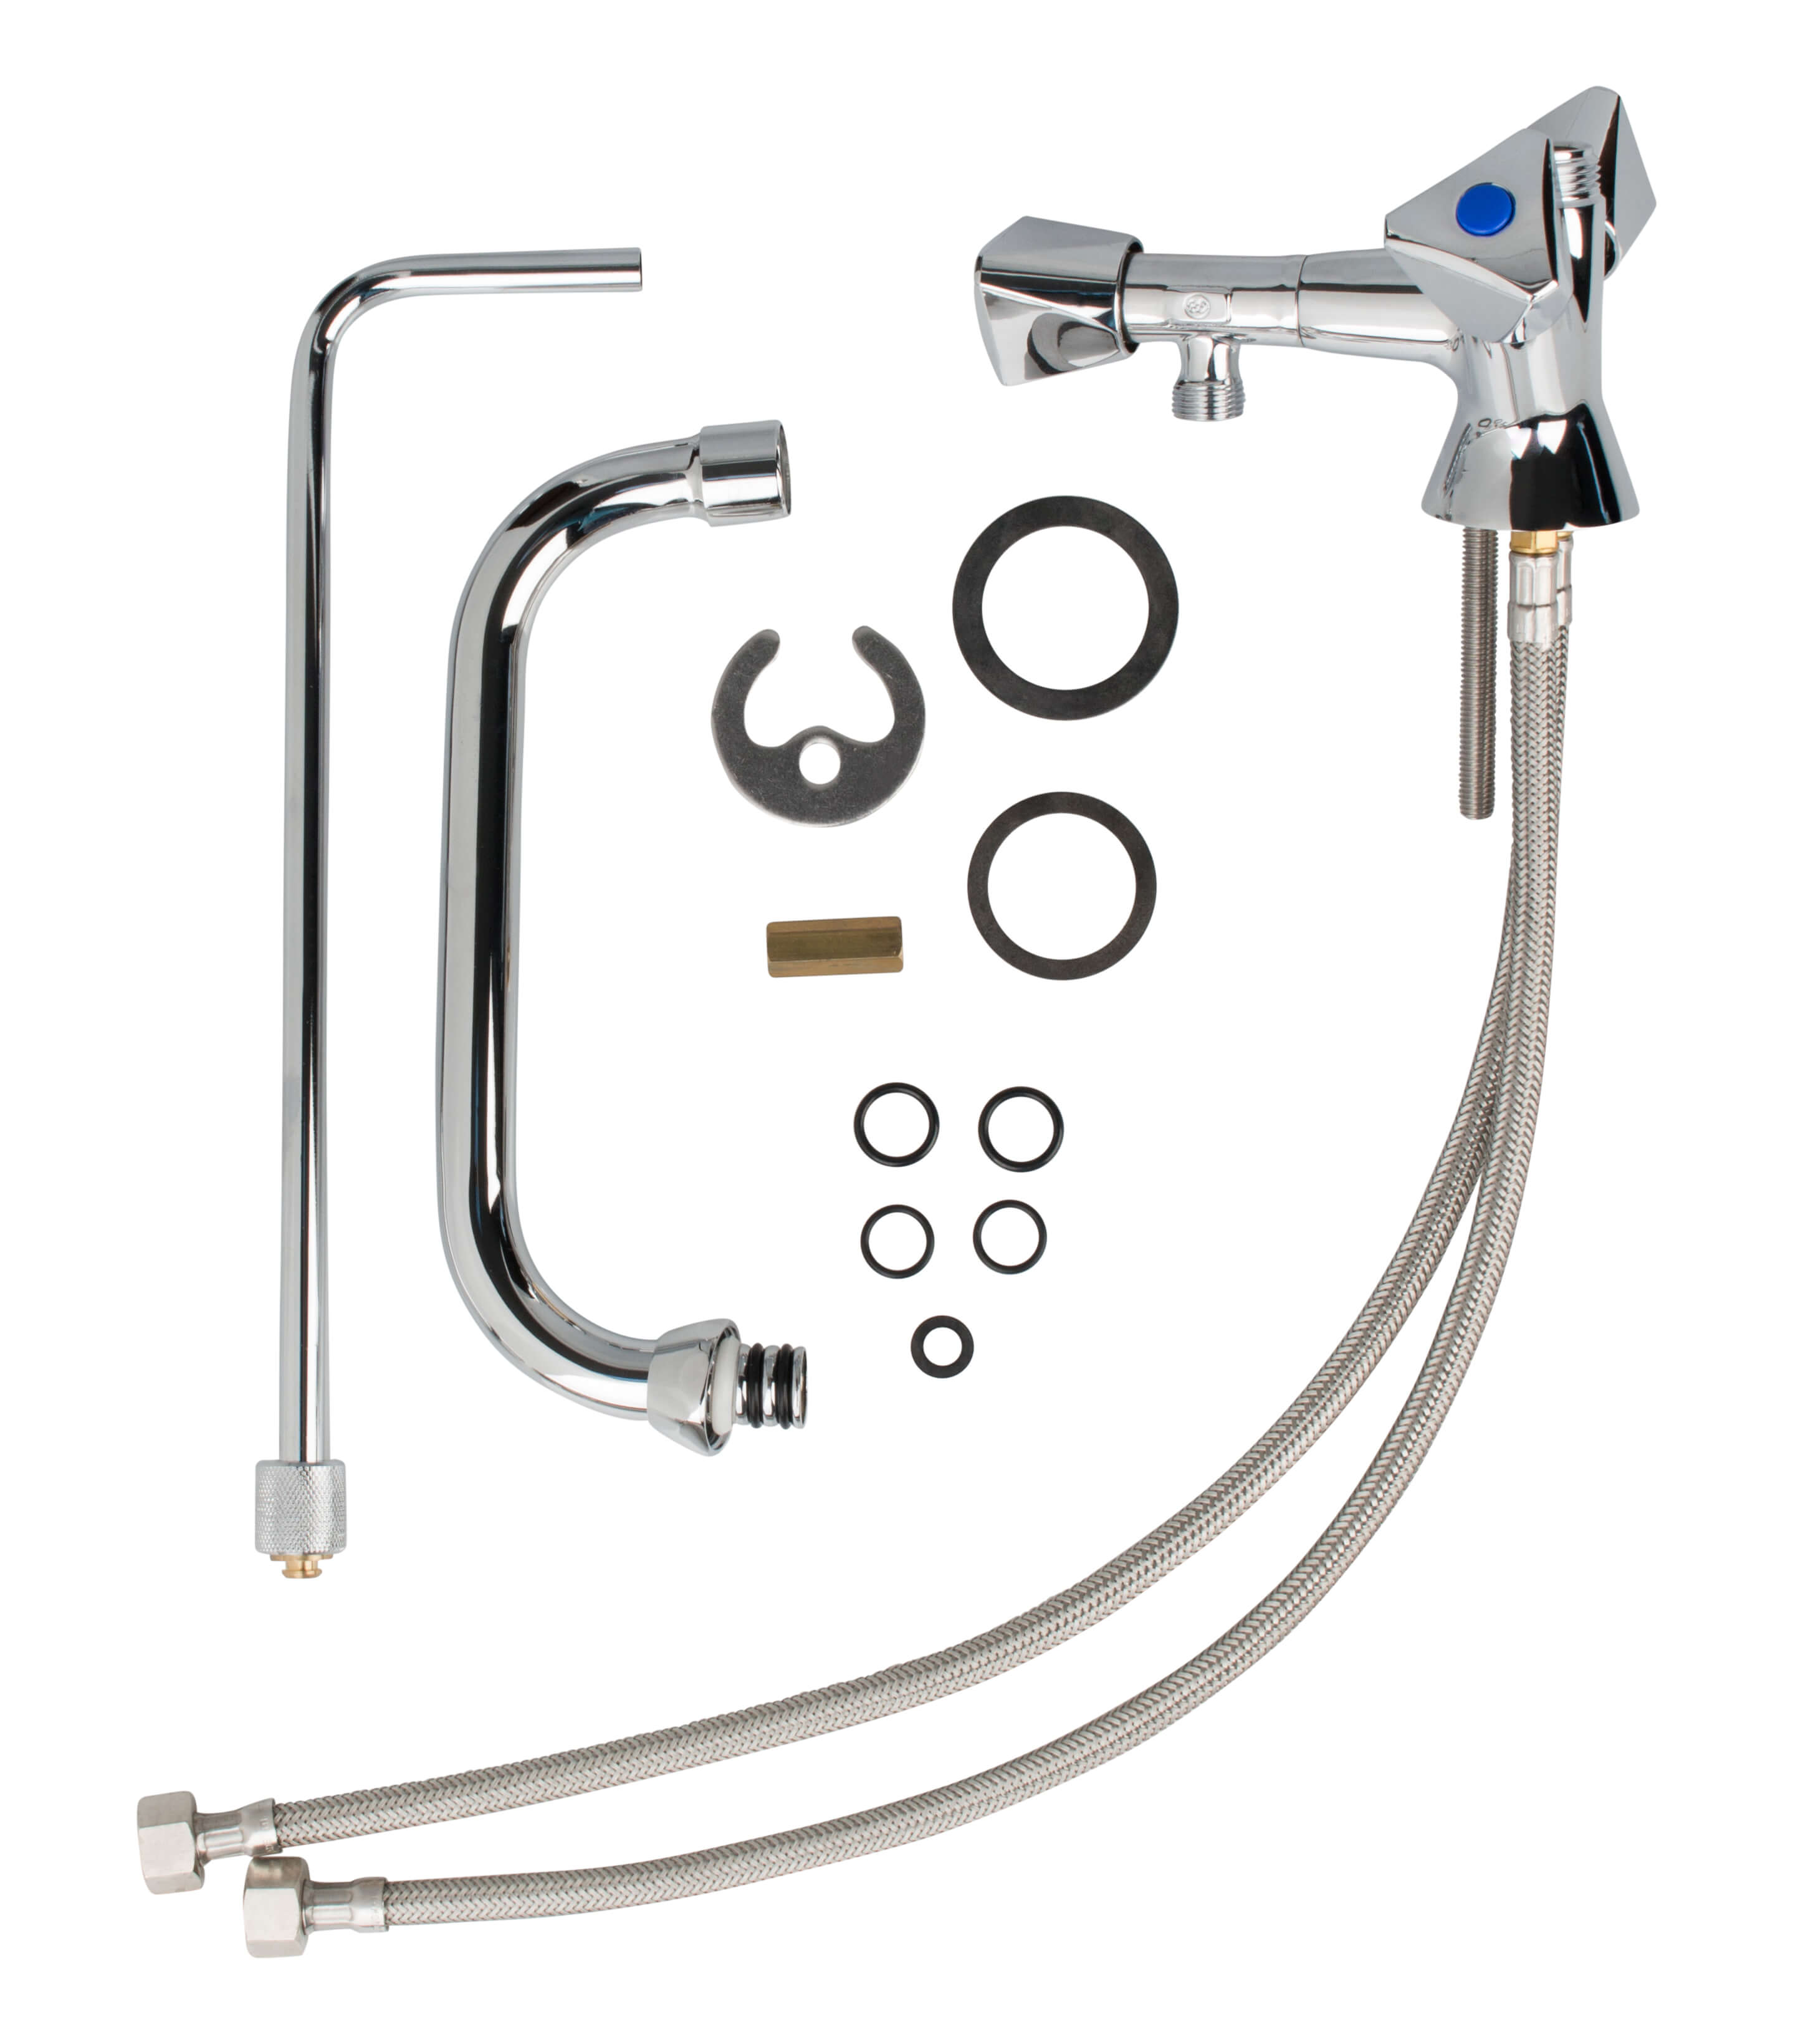 Mixer tap hot/cold 1 sink, Bruse - high pressure